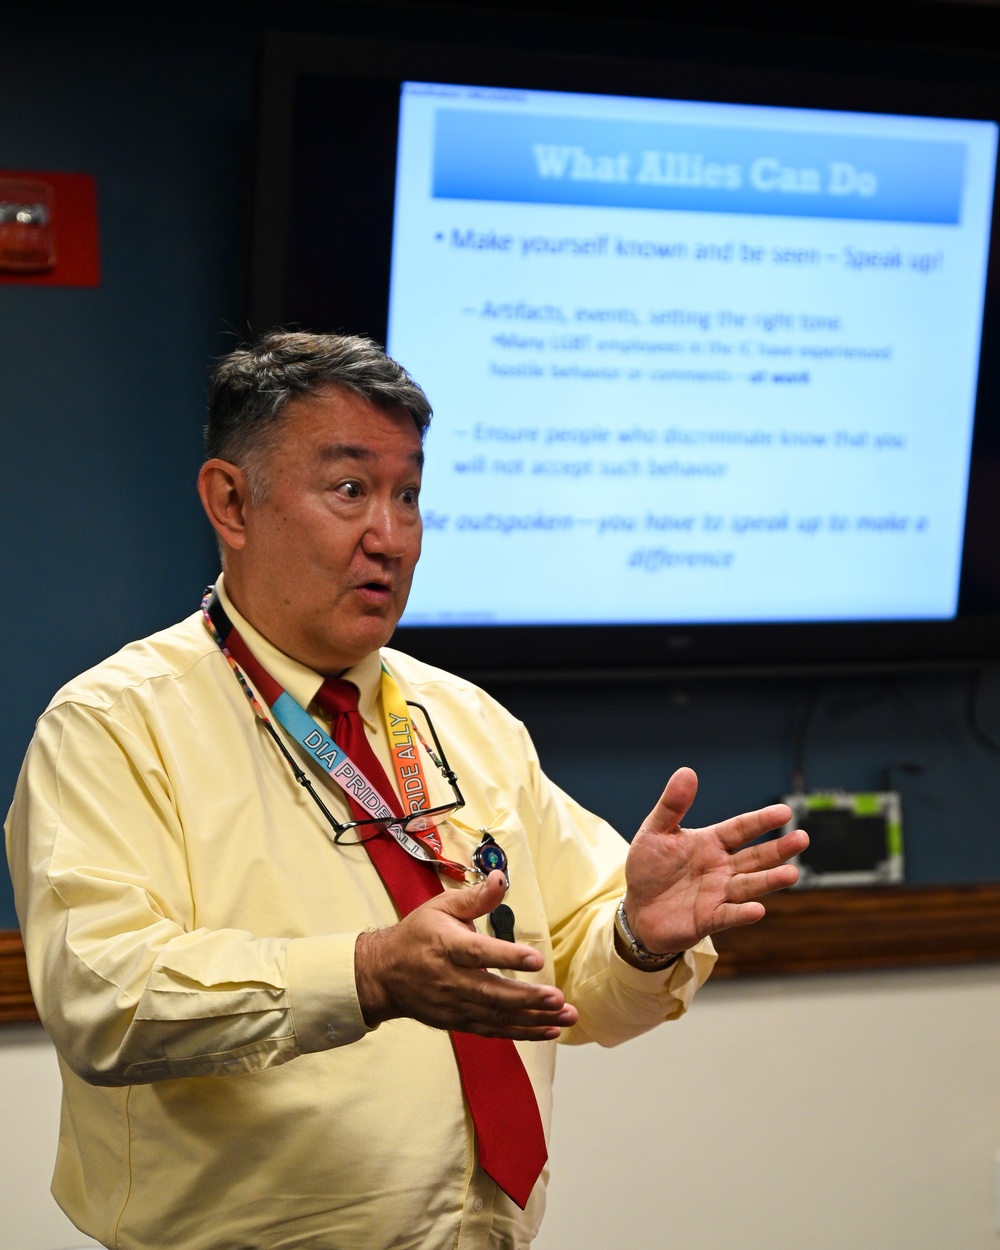 The Defense Intelligence Agency hosts Pride Ally training